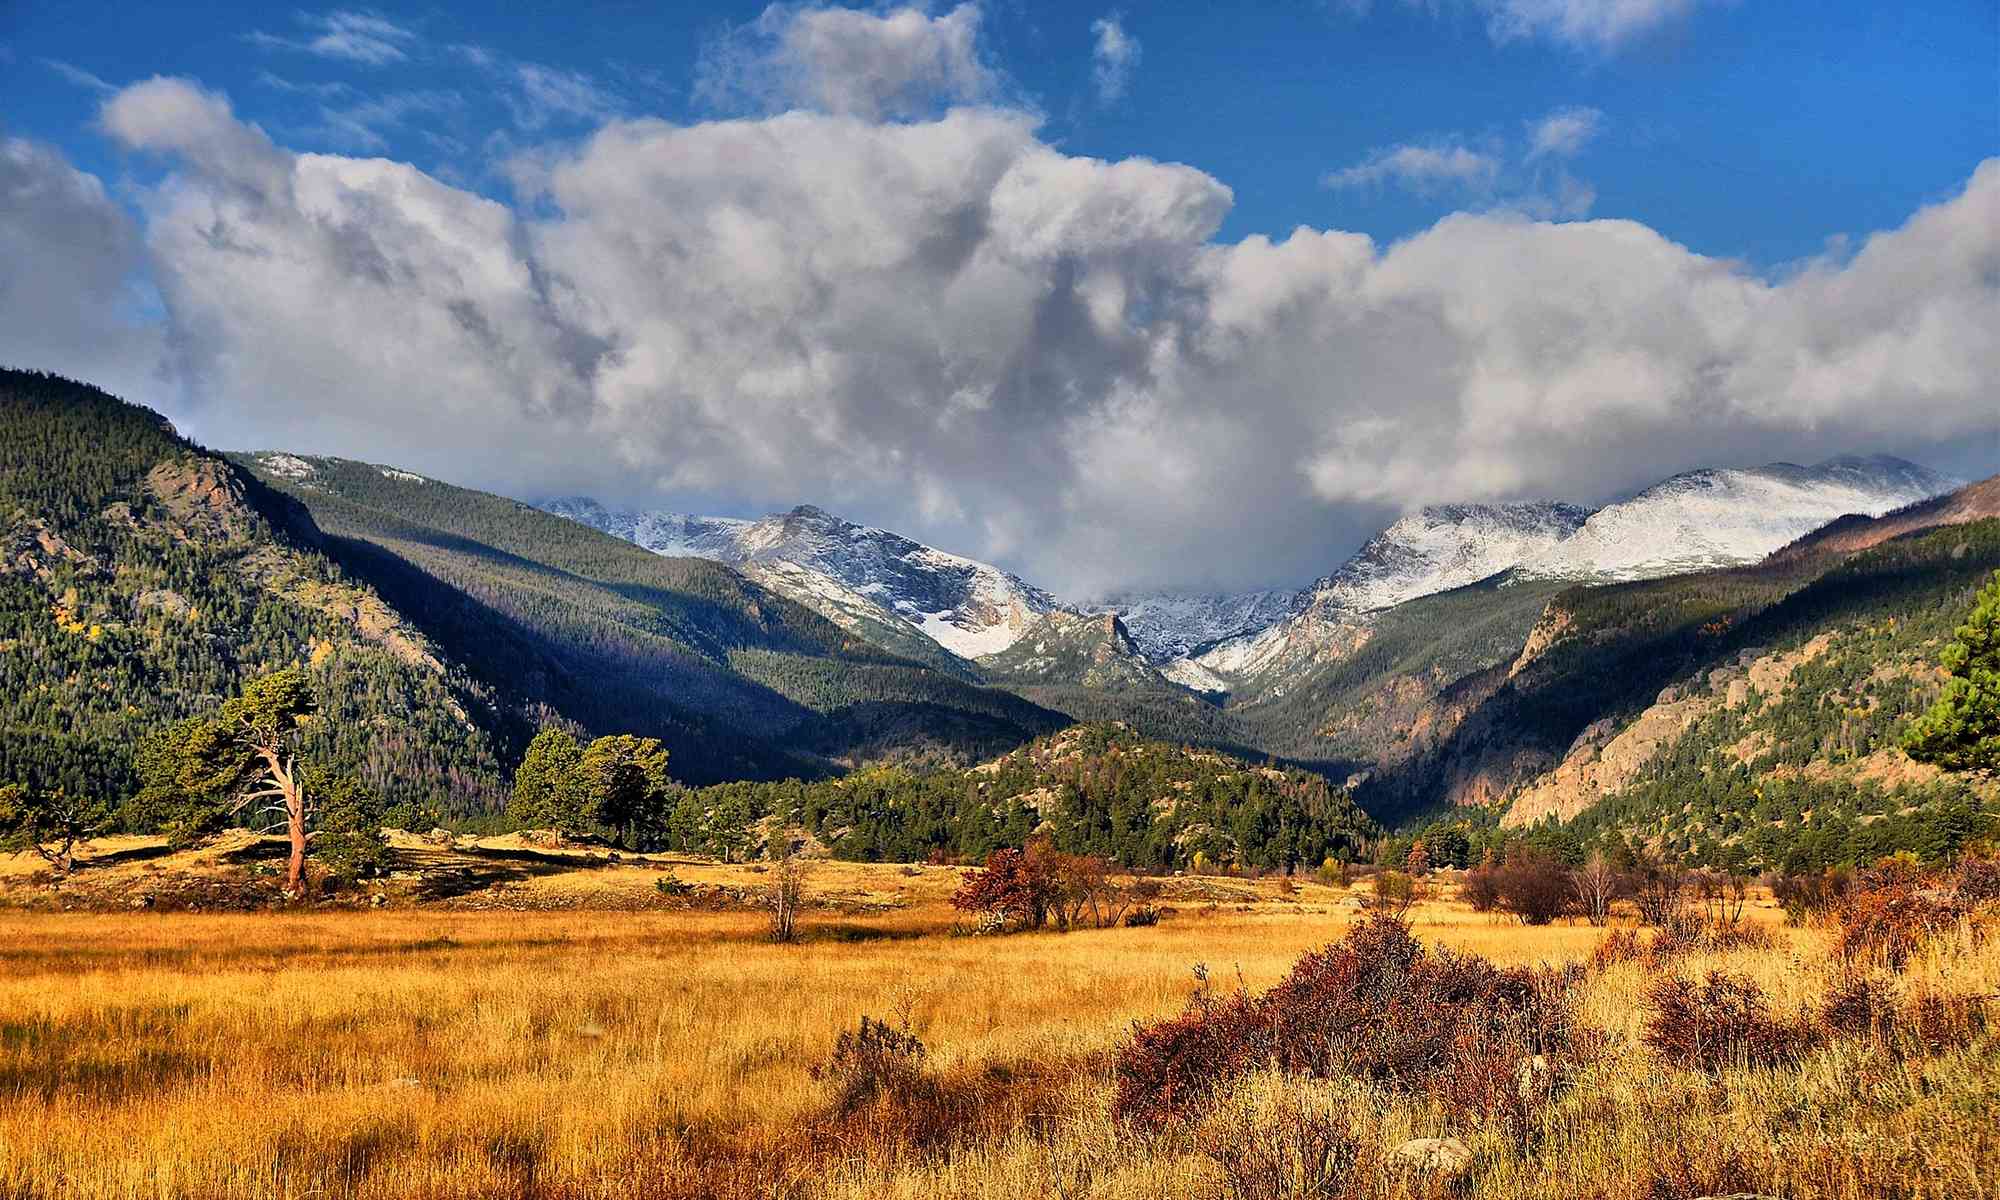 Colorado: Rocky Mountain High - We're in the Rockies